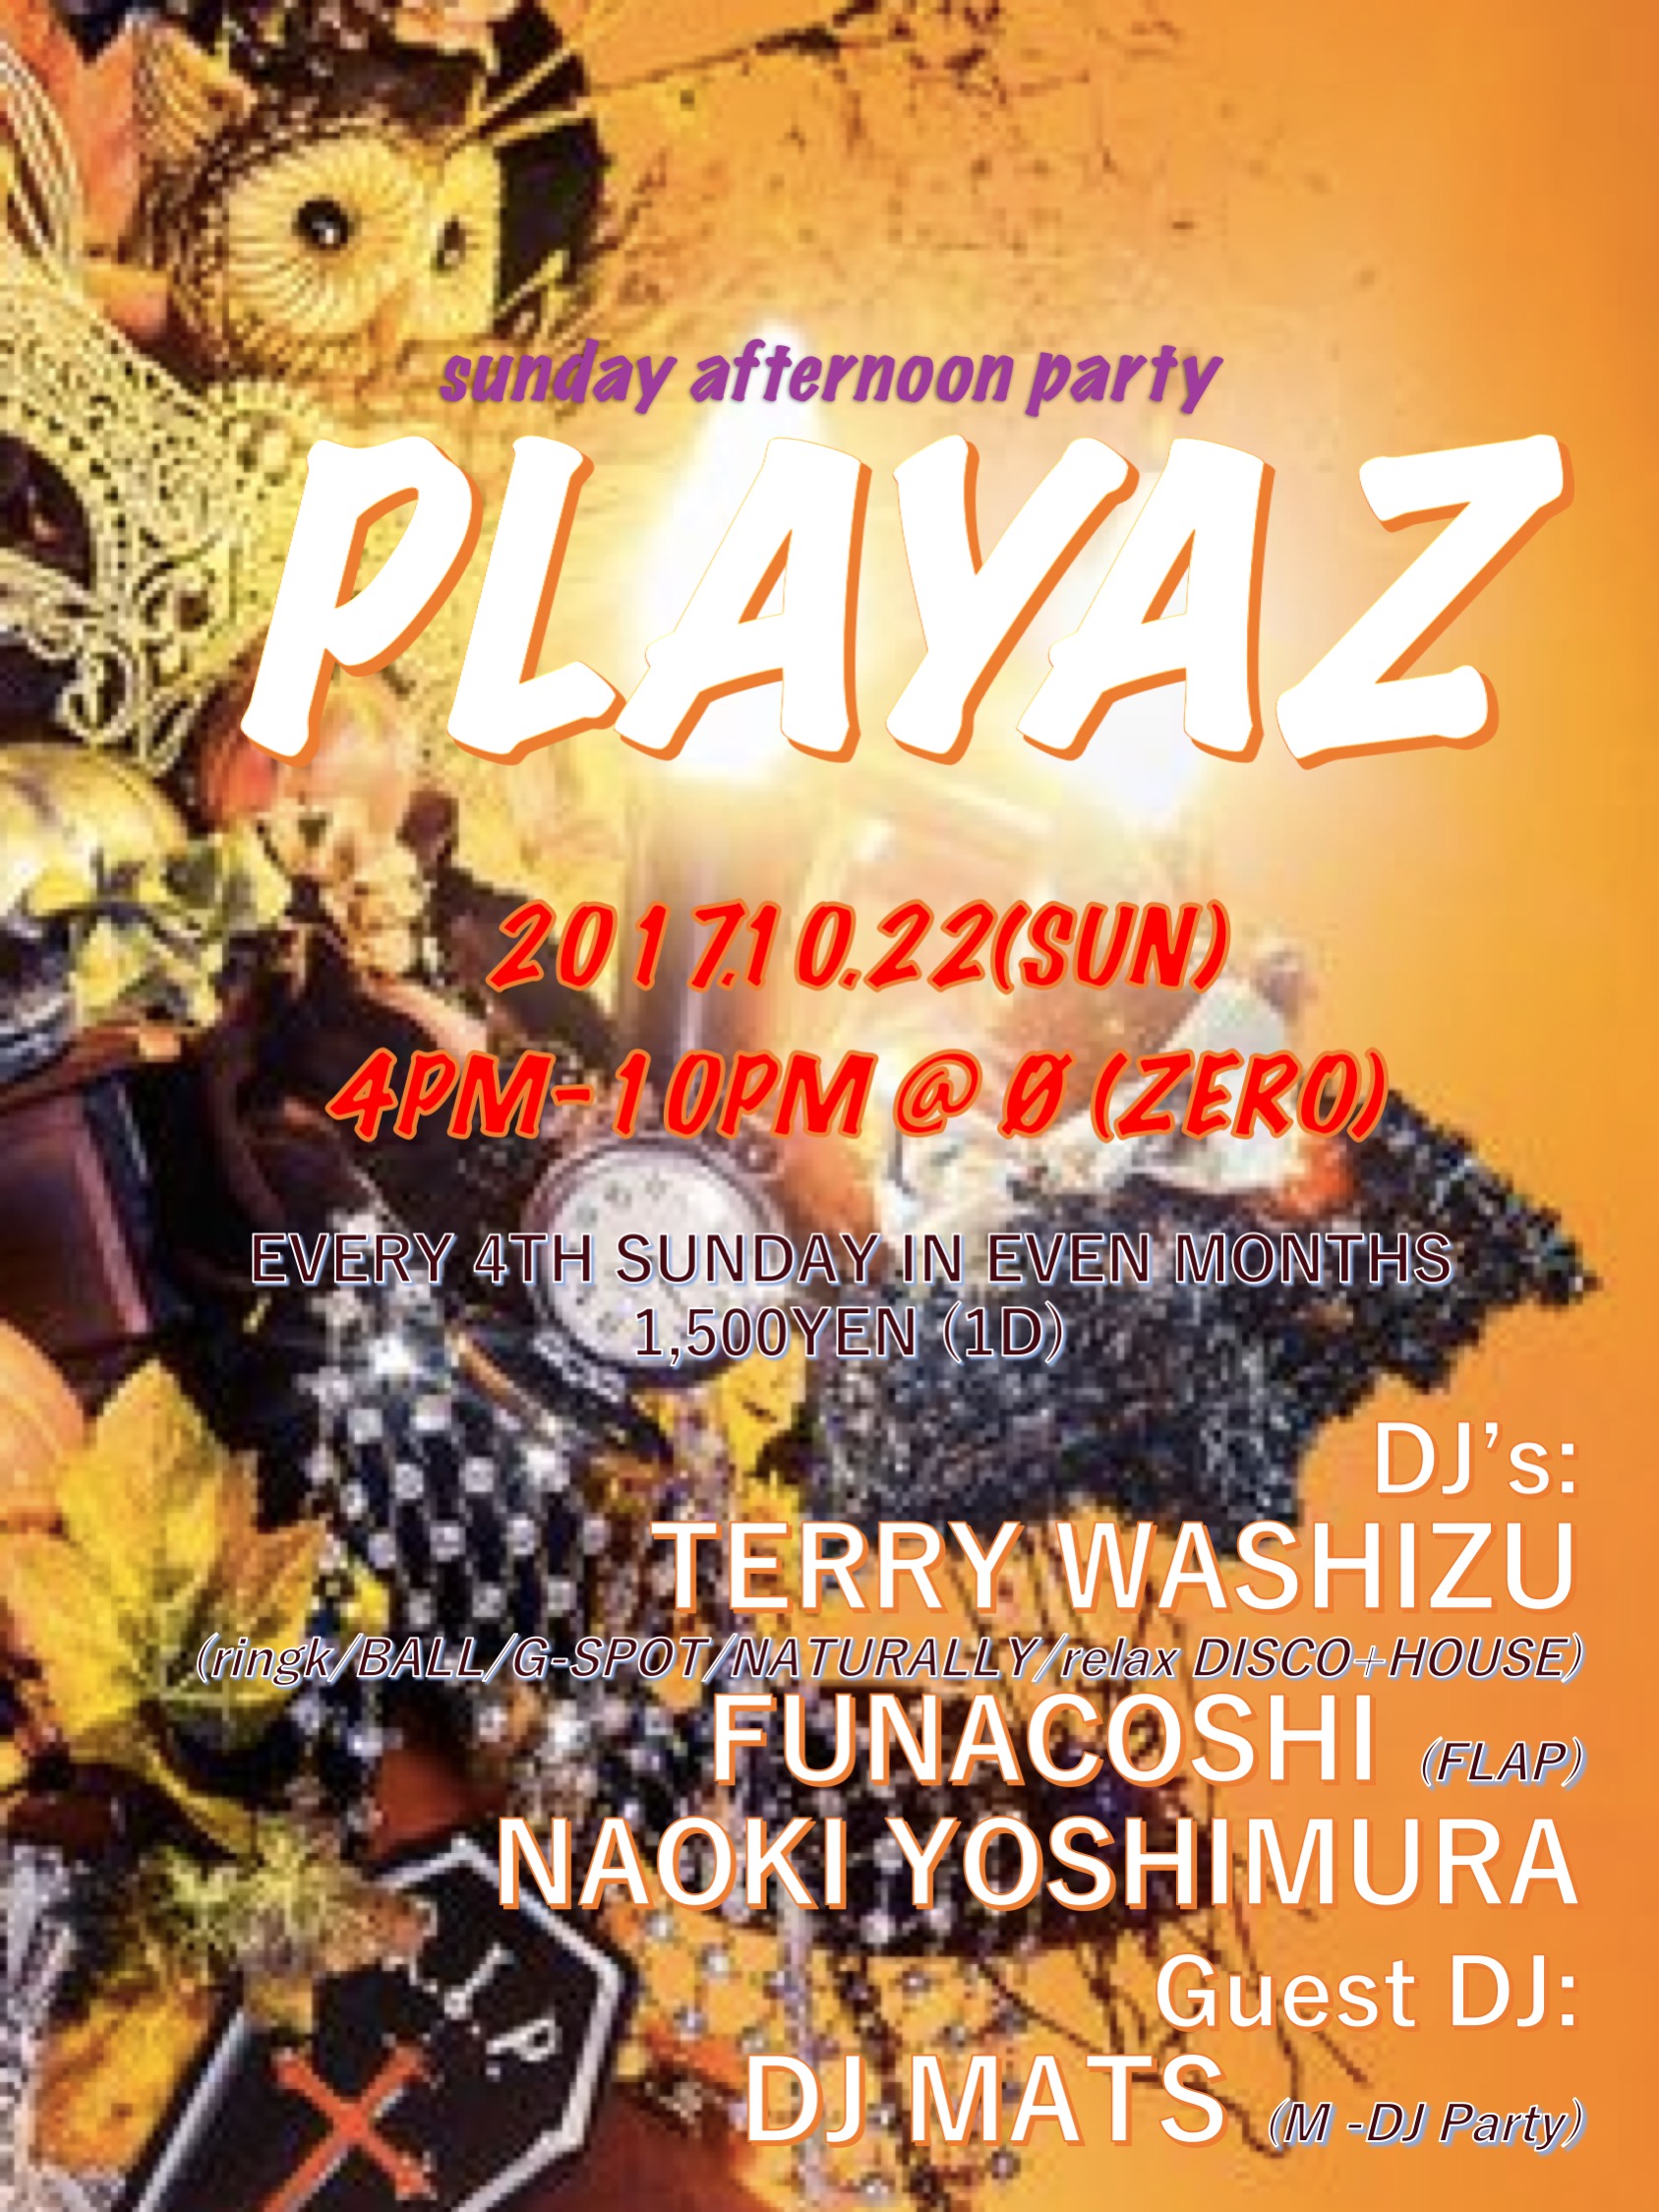 sunday afternoon party “PLAYAZ”